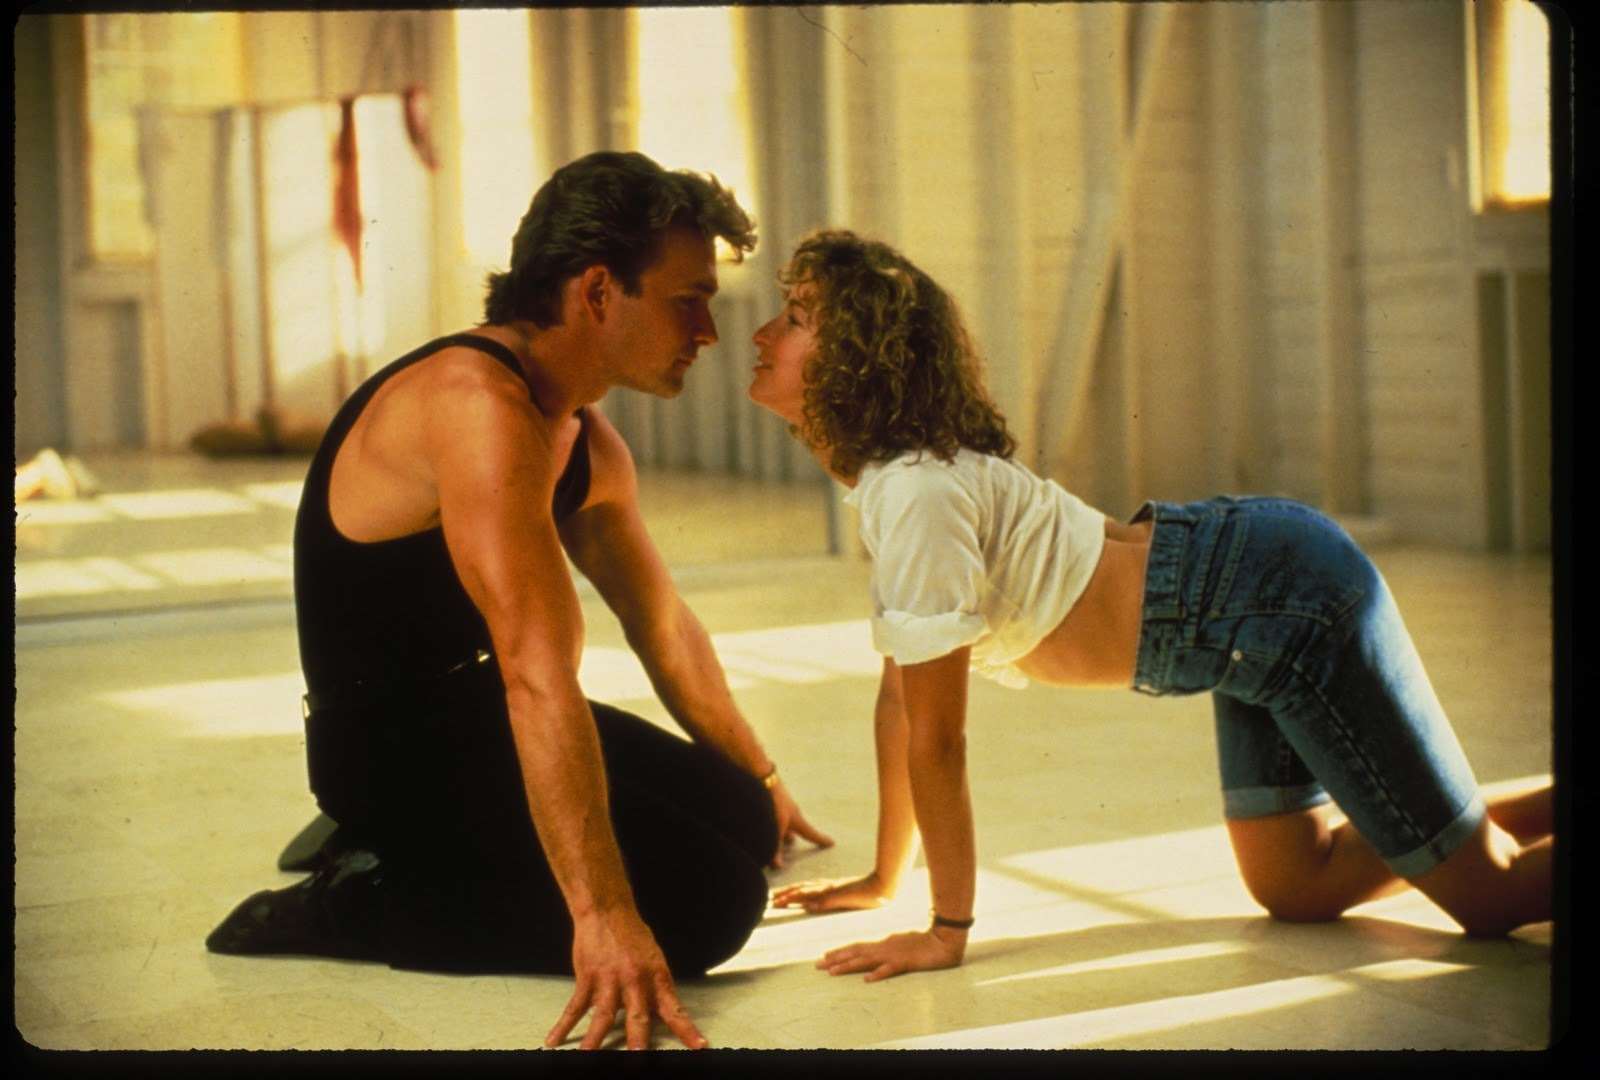 Patrick Swayze and Jennifer Grey star in Dirty Dancing